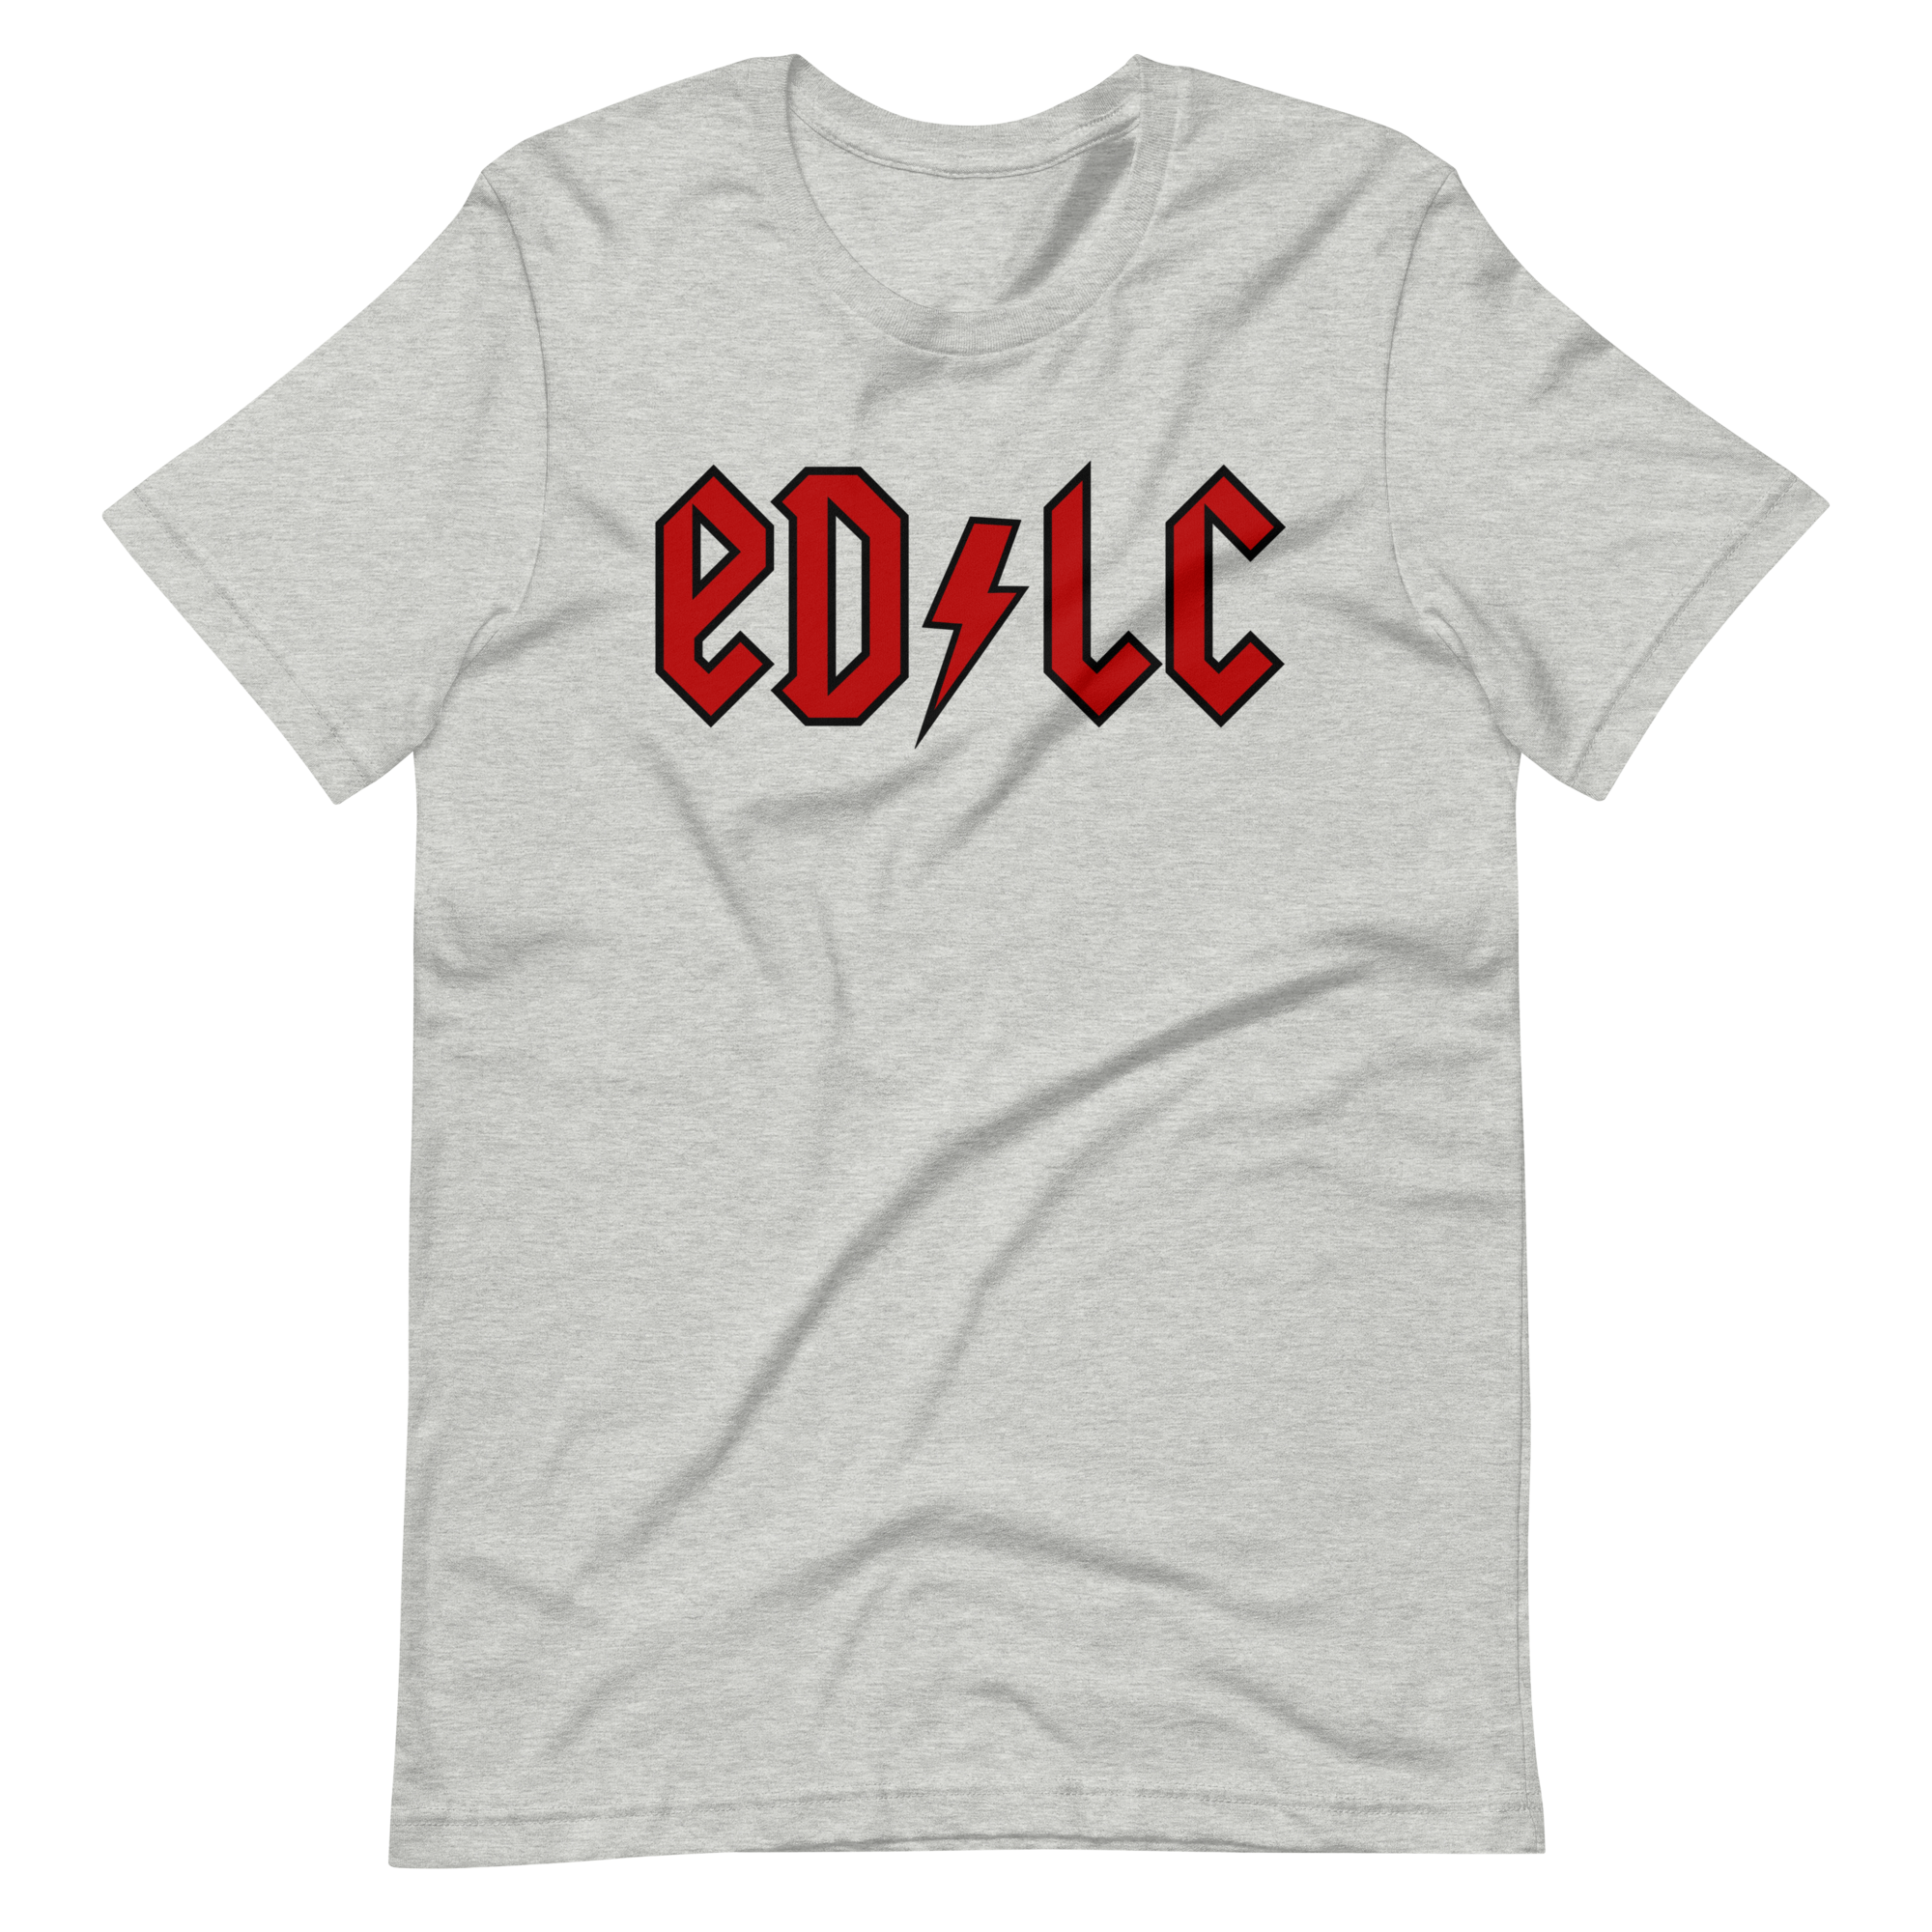 EDLC: Electric Red